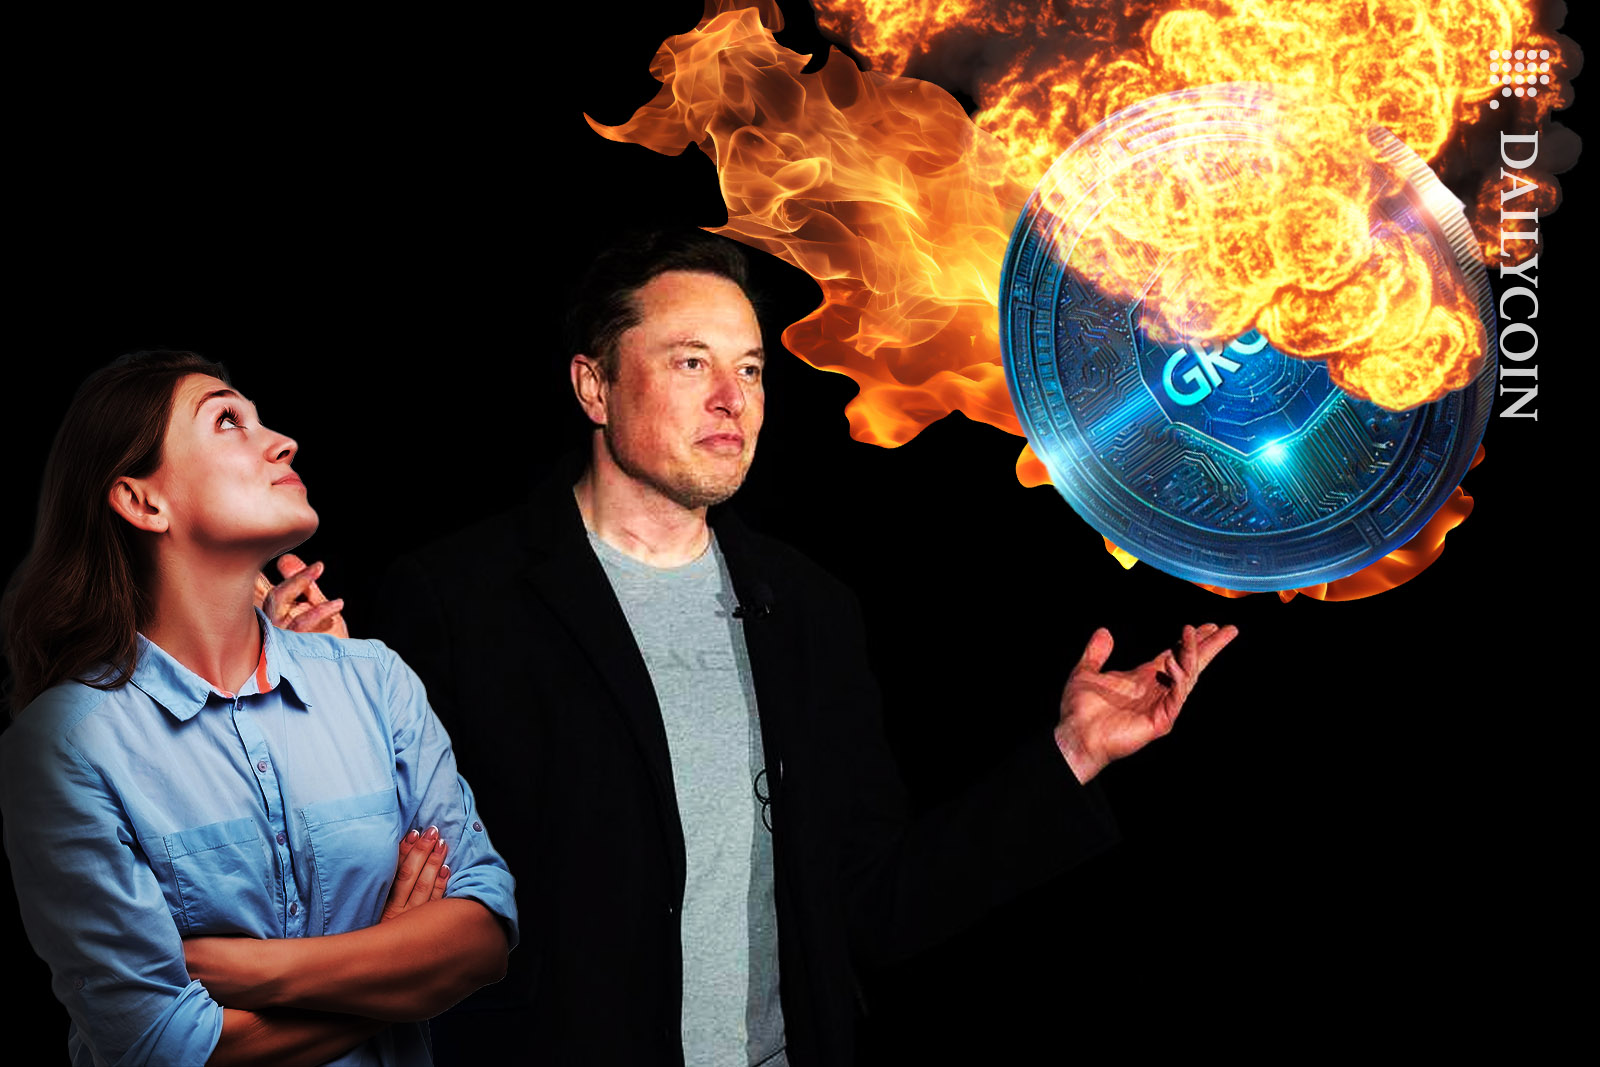 Grok coin up in flames, Elon Musk shrugs like he has no part in it. Woman looking up skeptical.